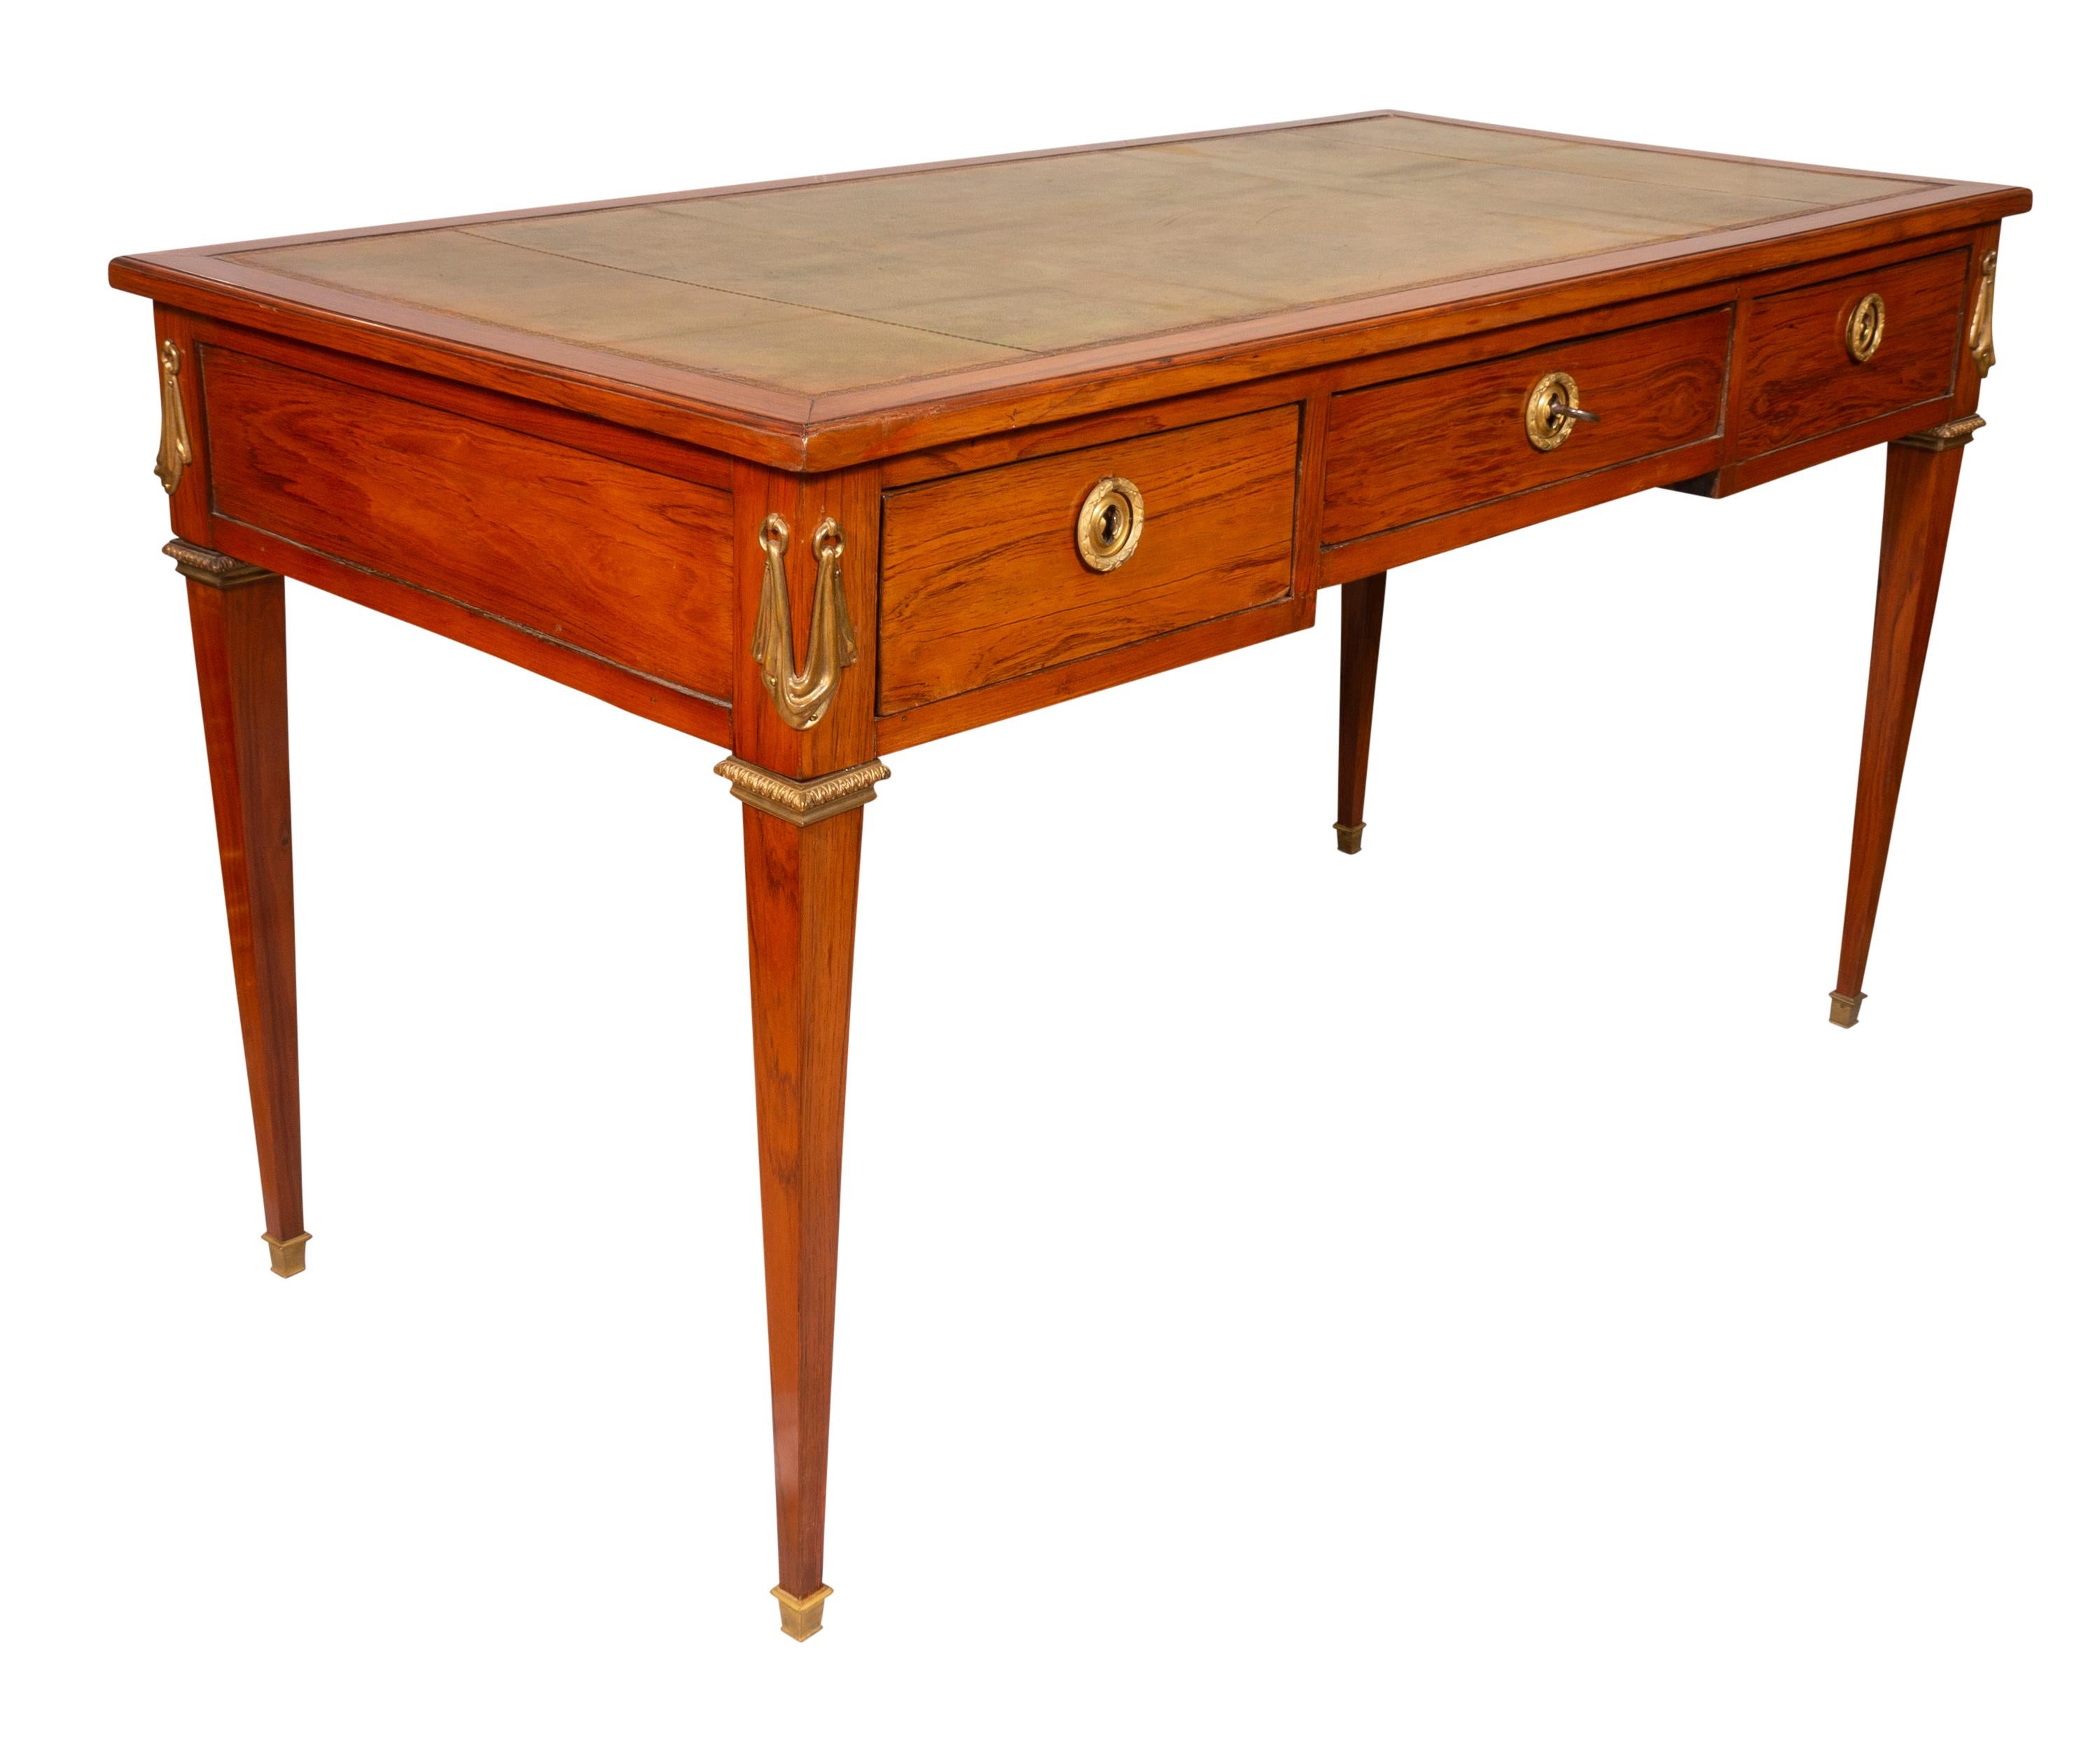 Louis XVI Tulipwood and Ormolu Mounted Bureau Plat In Good Condition For Sale In Essex, MA